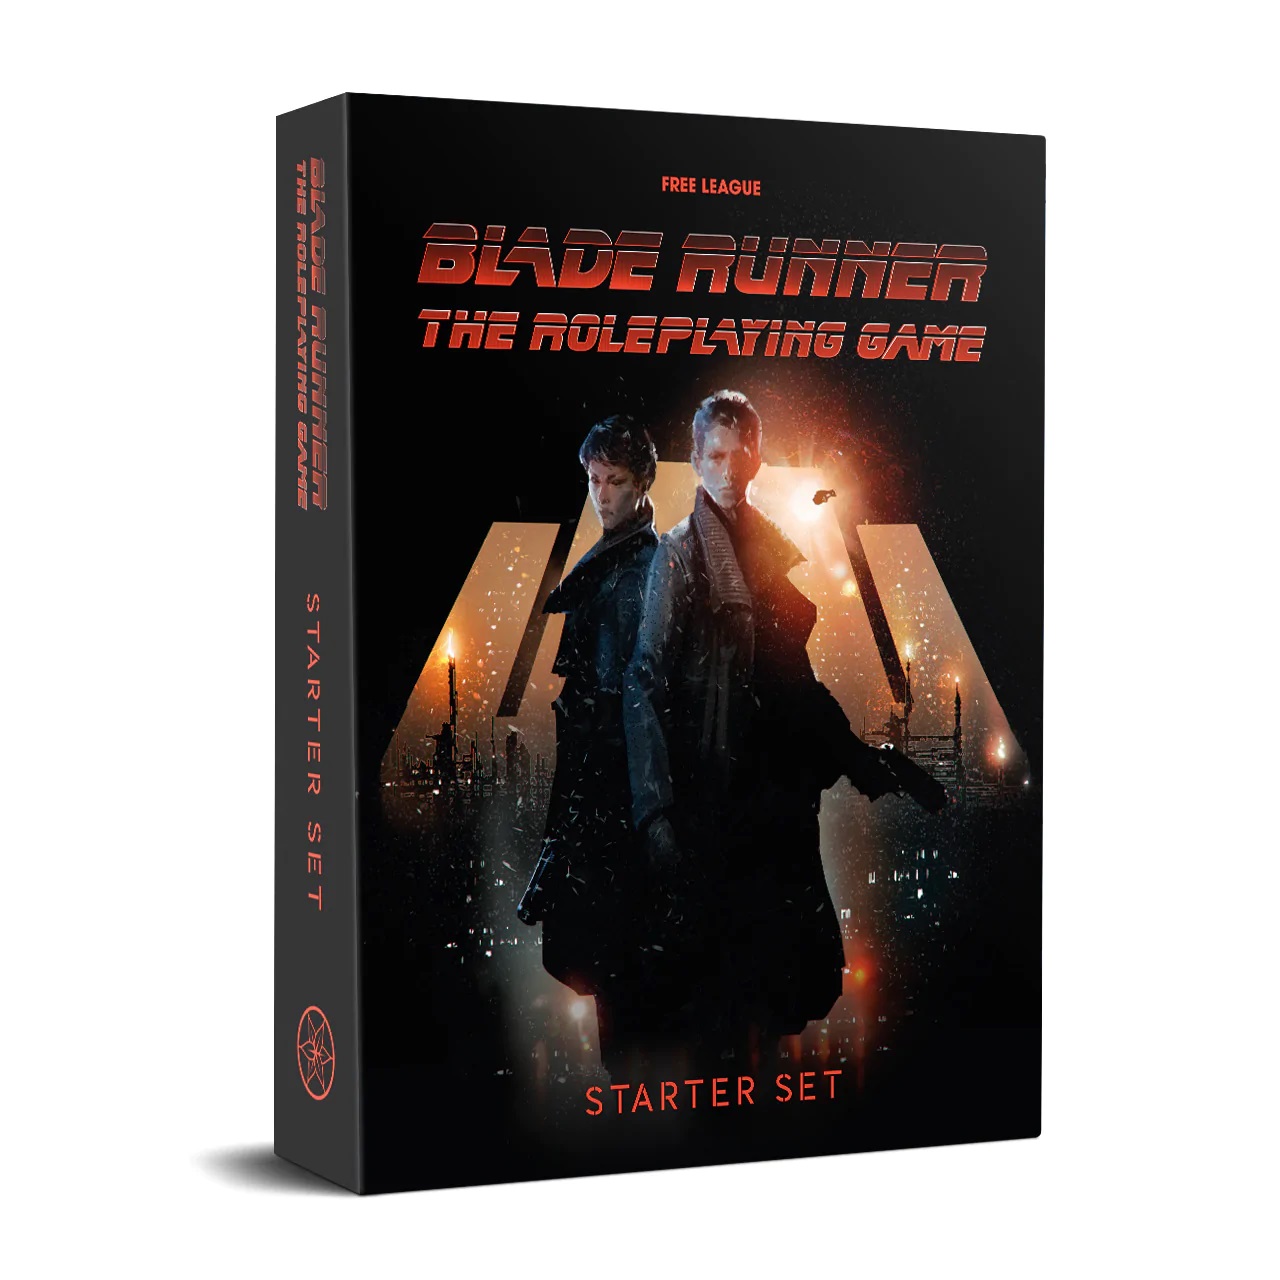 Blade Runner The Roleplaying Game Starter Set - Free League Publishing